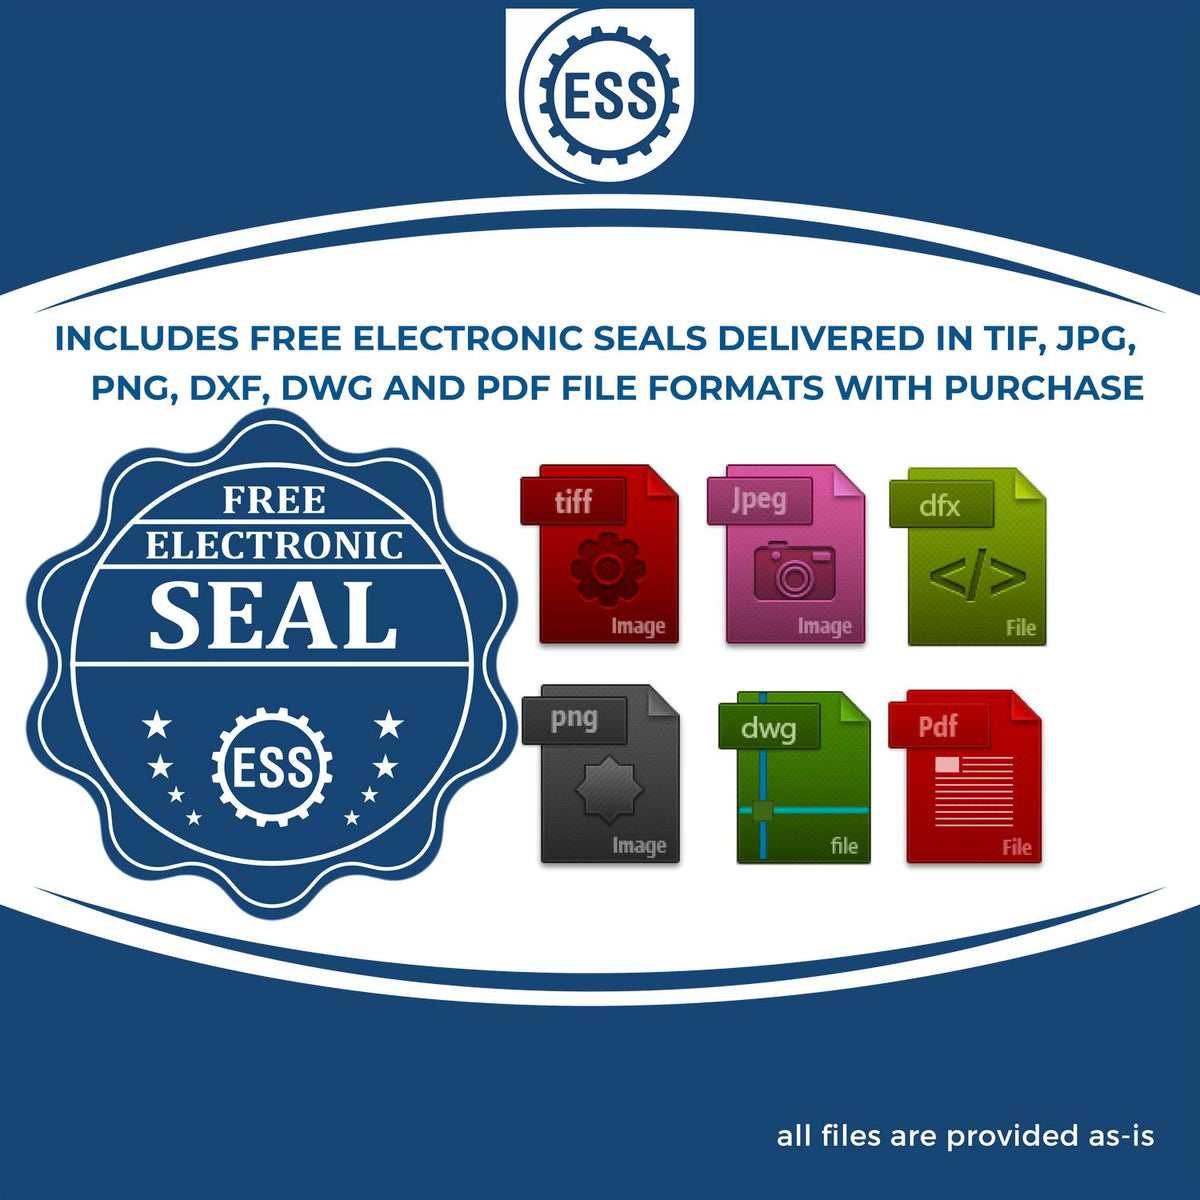 An infographic for the free electronic seal for the Long Reach Arkansas Geology Seal illustrating the different file type icons such as DXF, DWG, TIF, JPG and PNG.